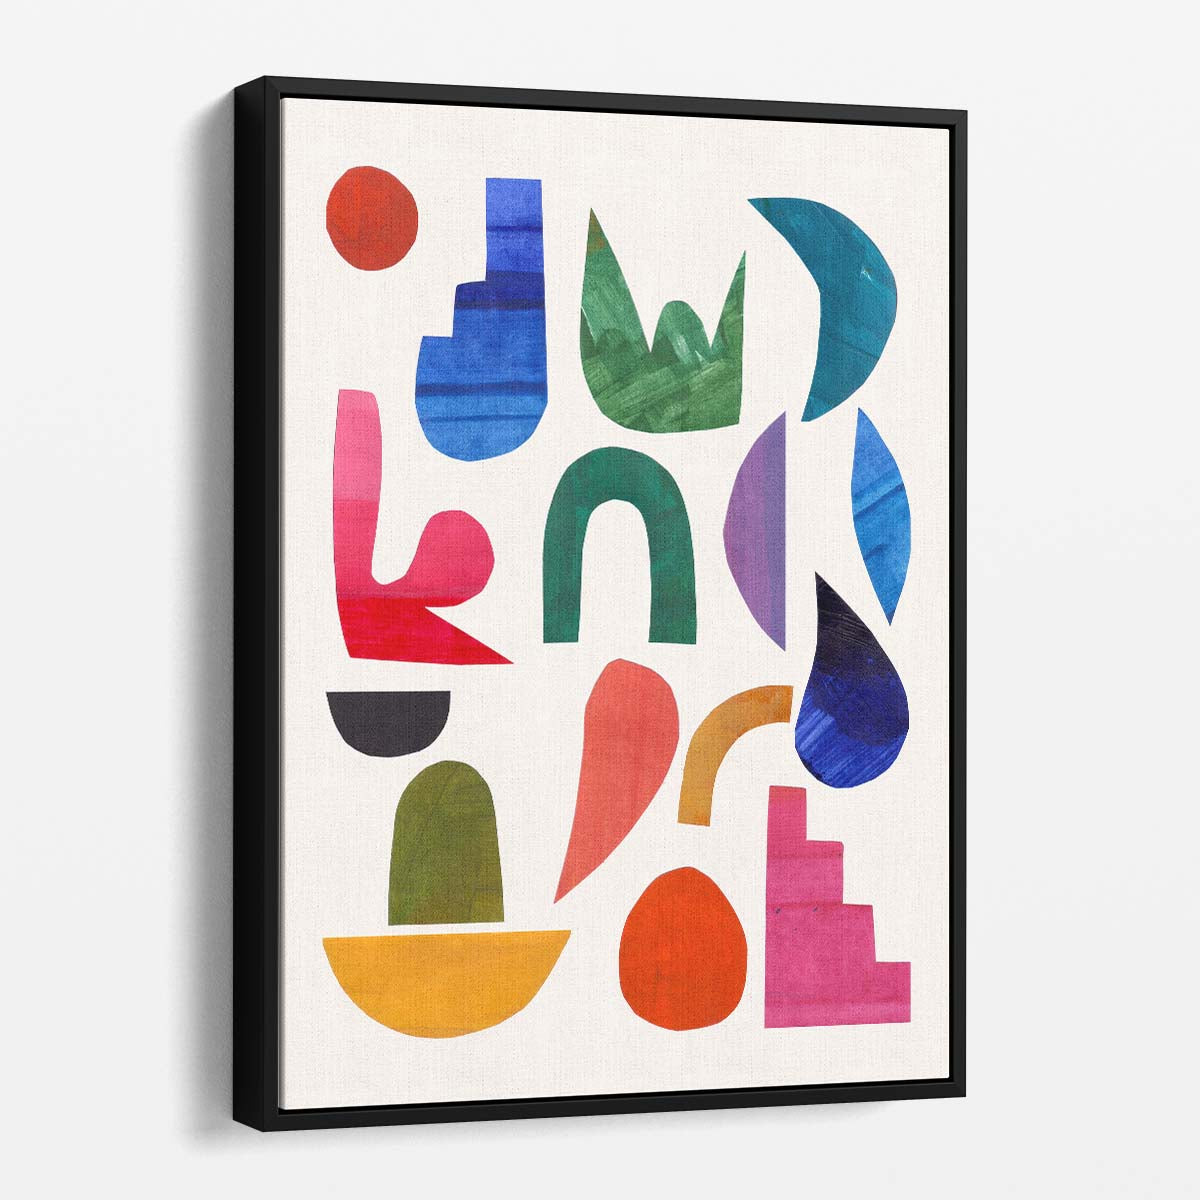 Colorful Geometric Abstract Illustration, Toy Box by Ejaaz Haniff by Luxuriance Designs, made in USA